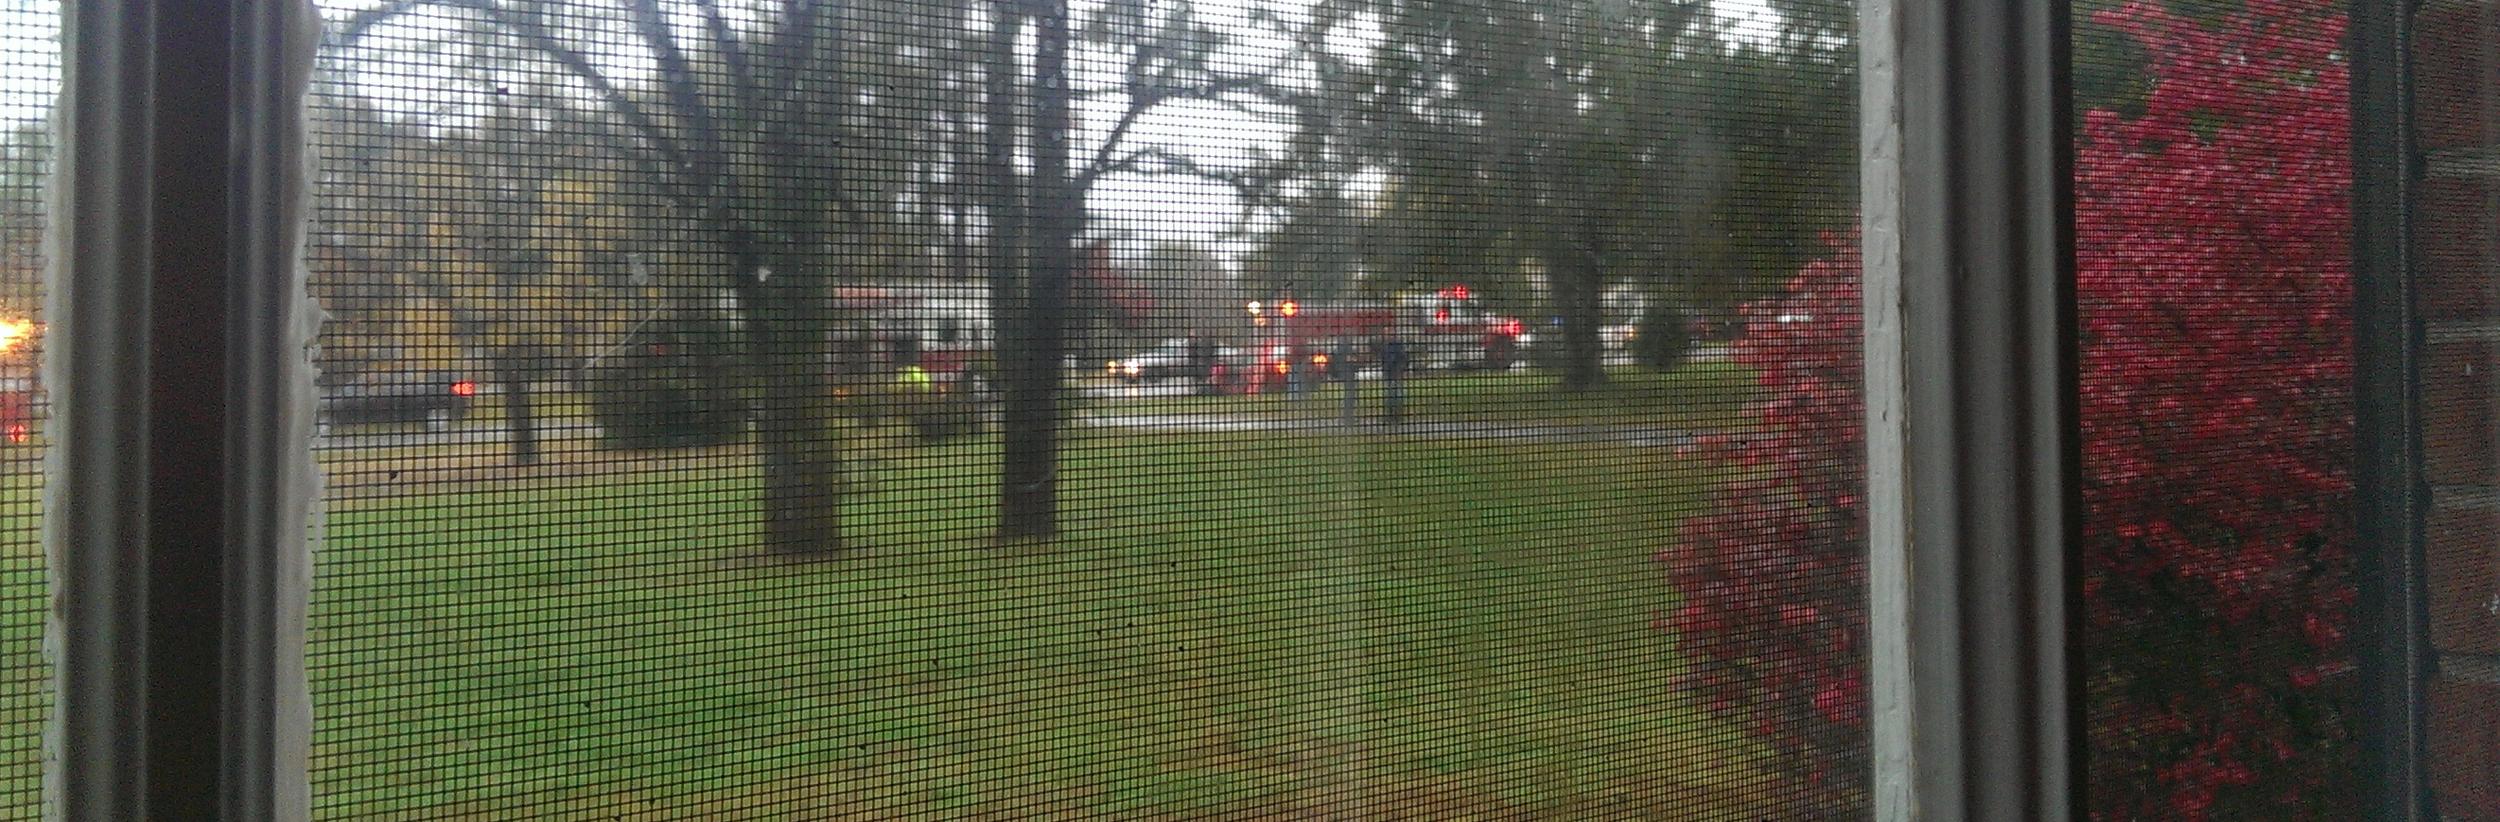 The red car that rolled into the neighbors yard.